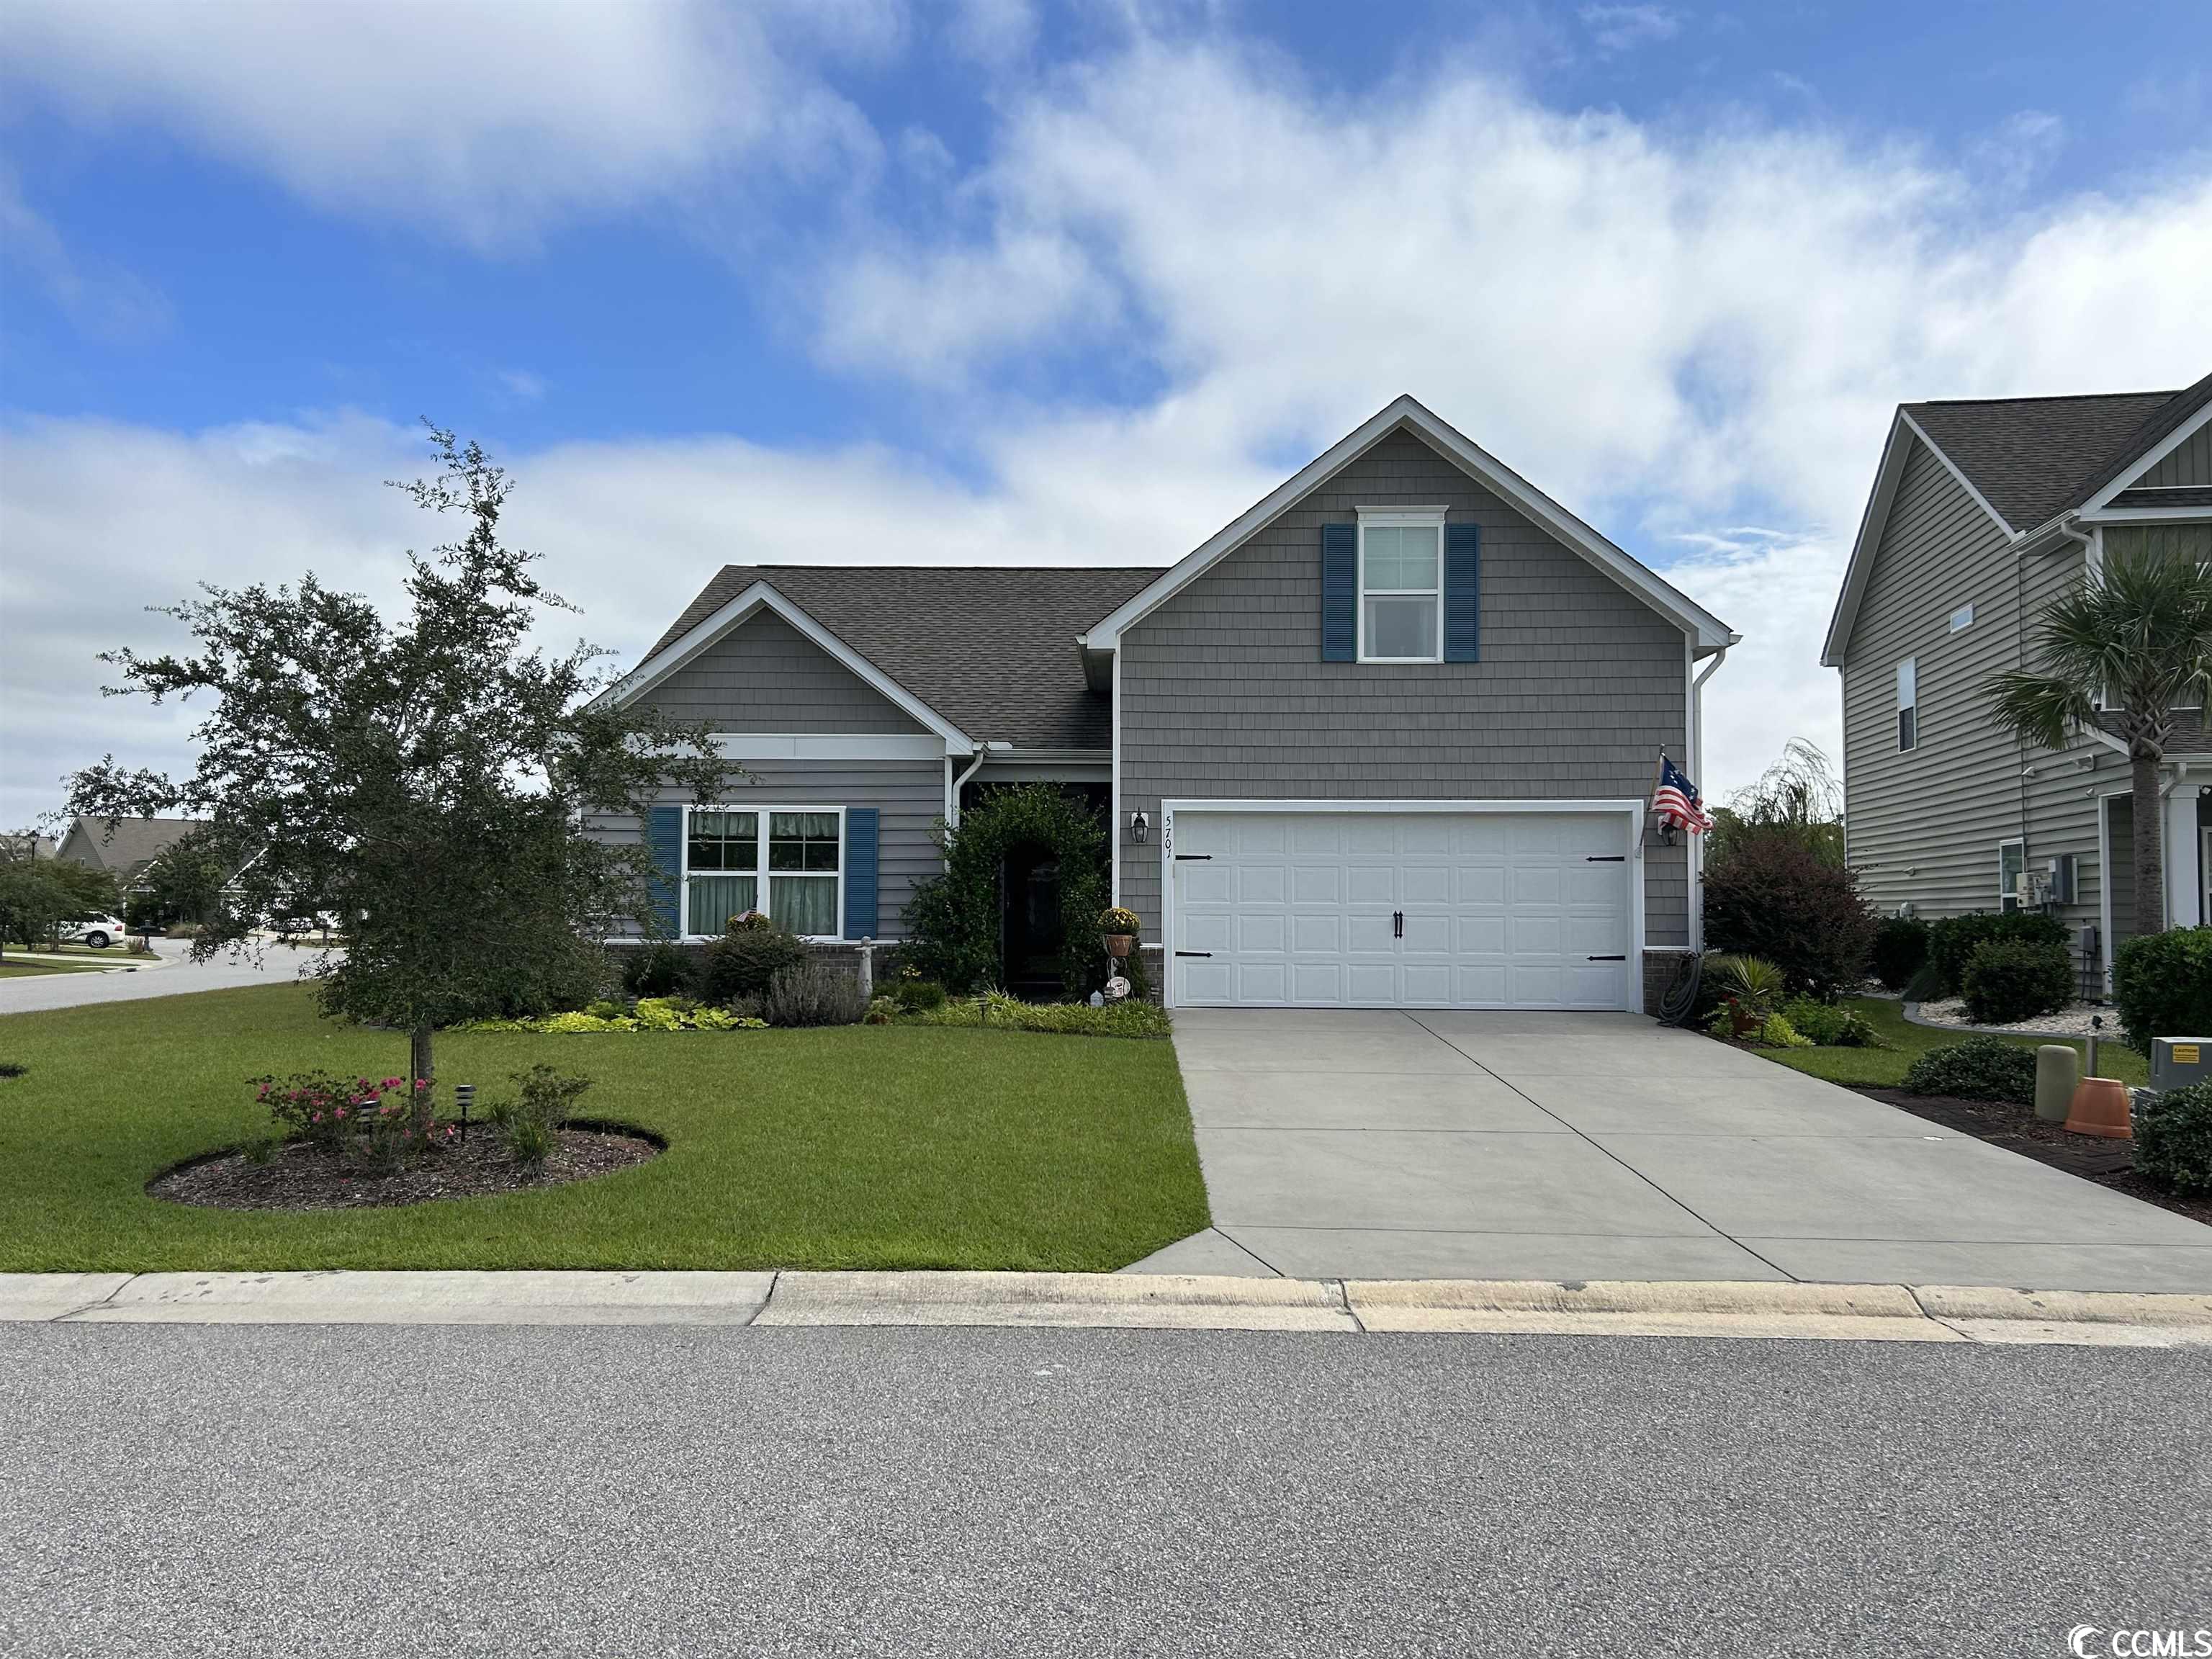 5701 Cottonseed Ct. Myrtle Beach, SC 29579